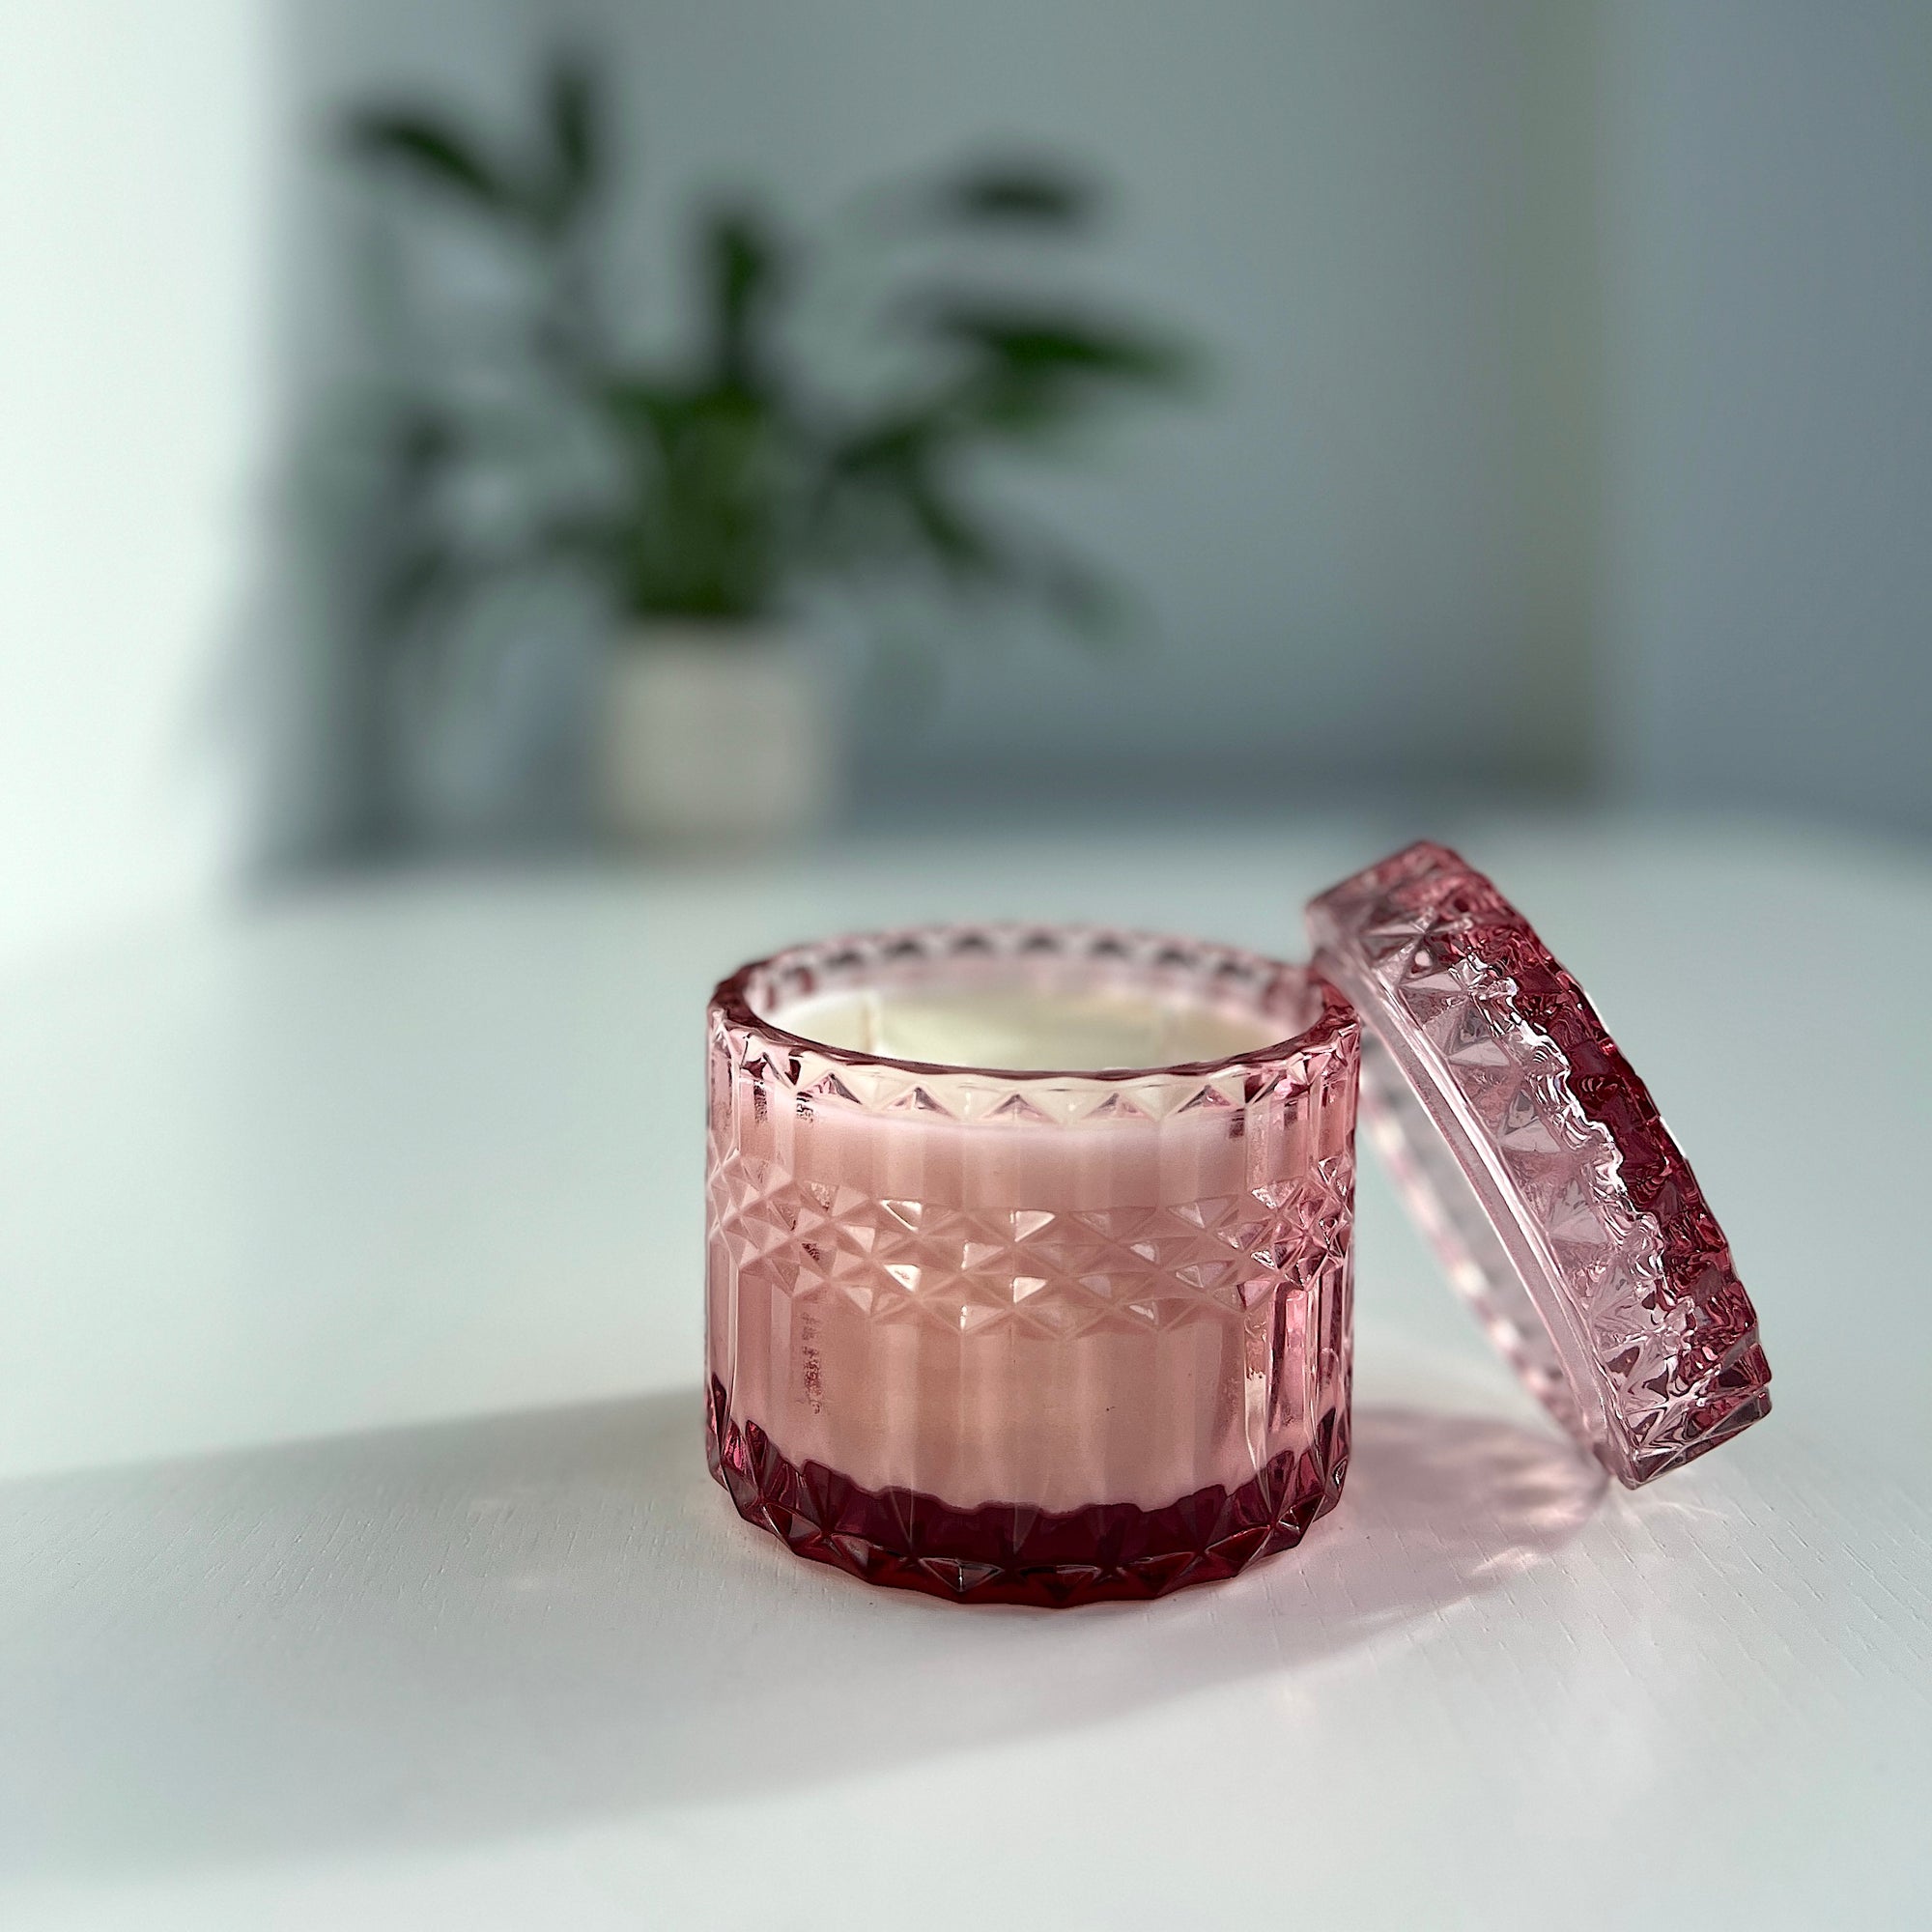 LULUMIÈRE Gem Candle in Ruby